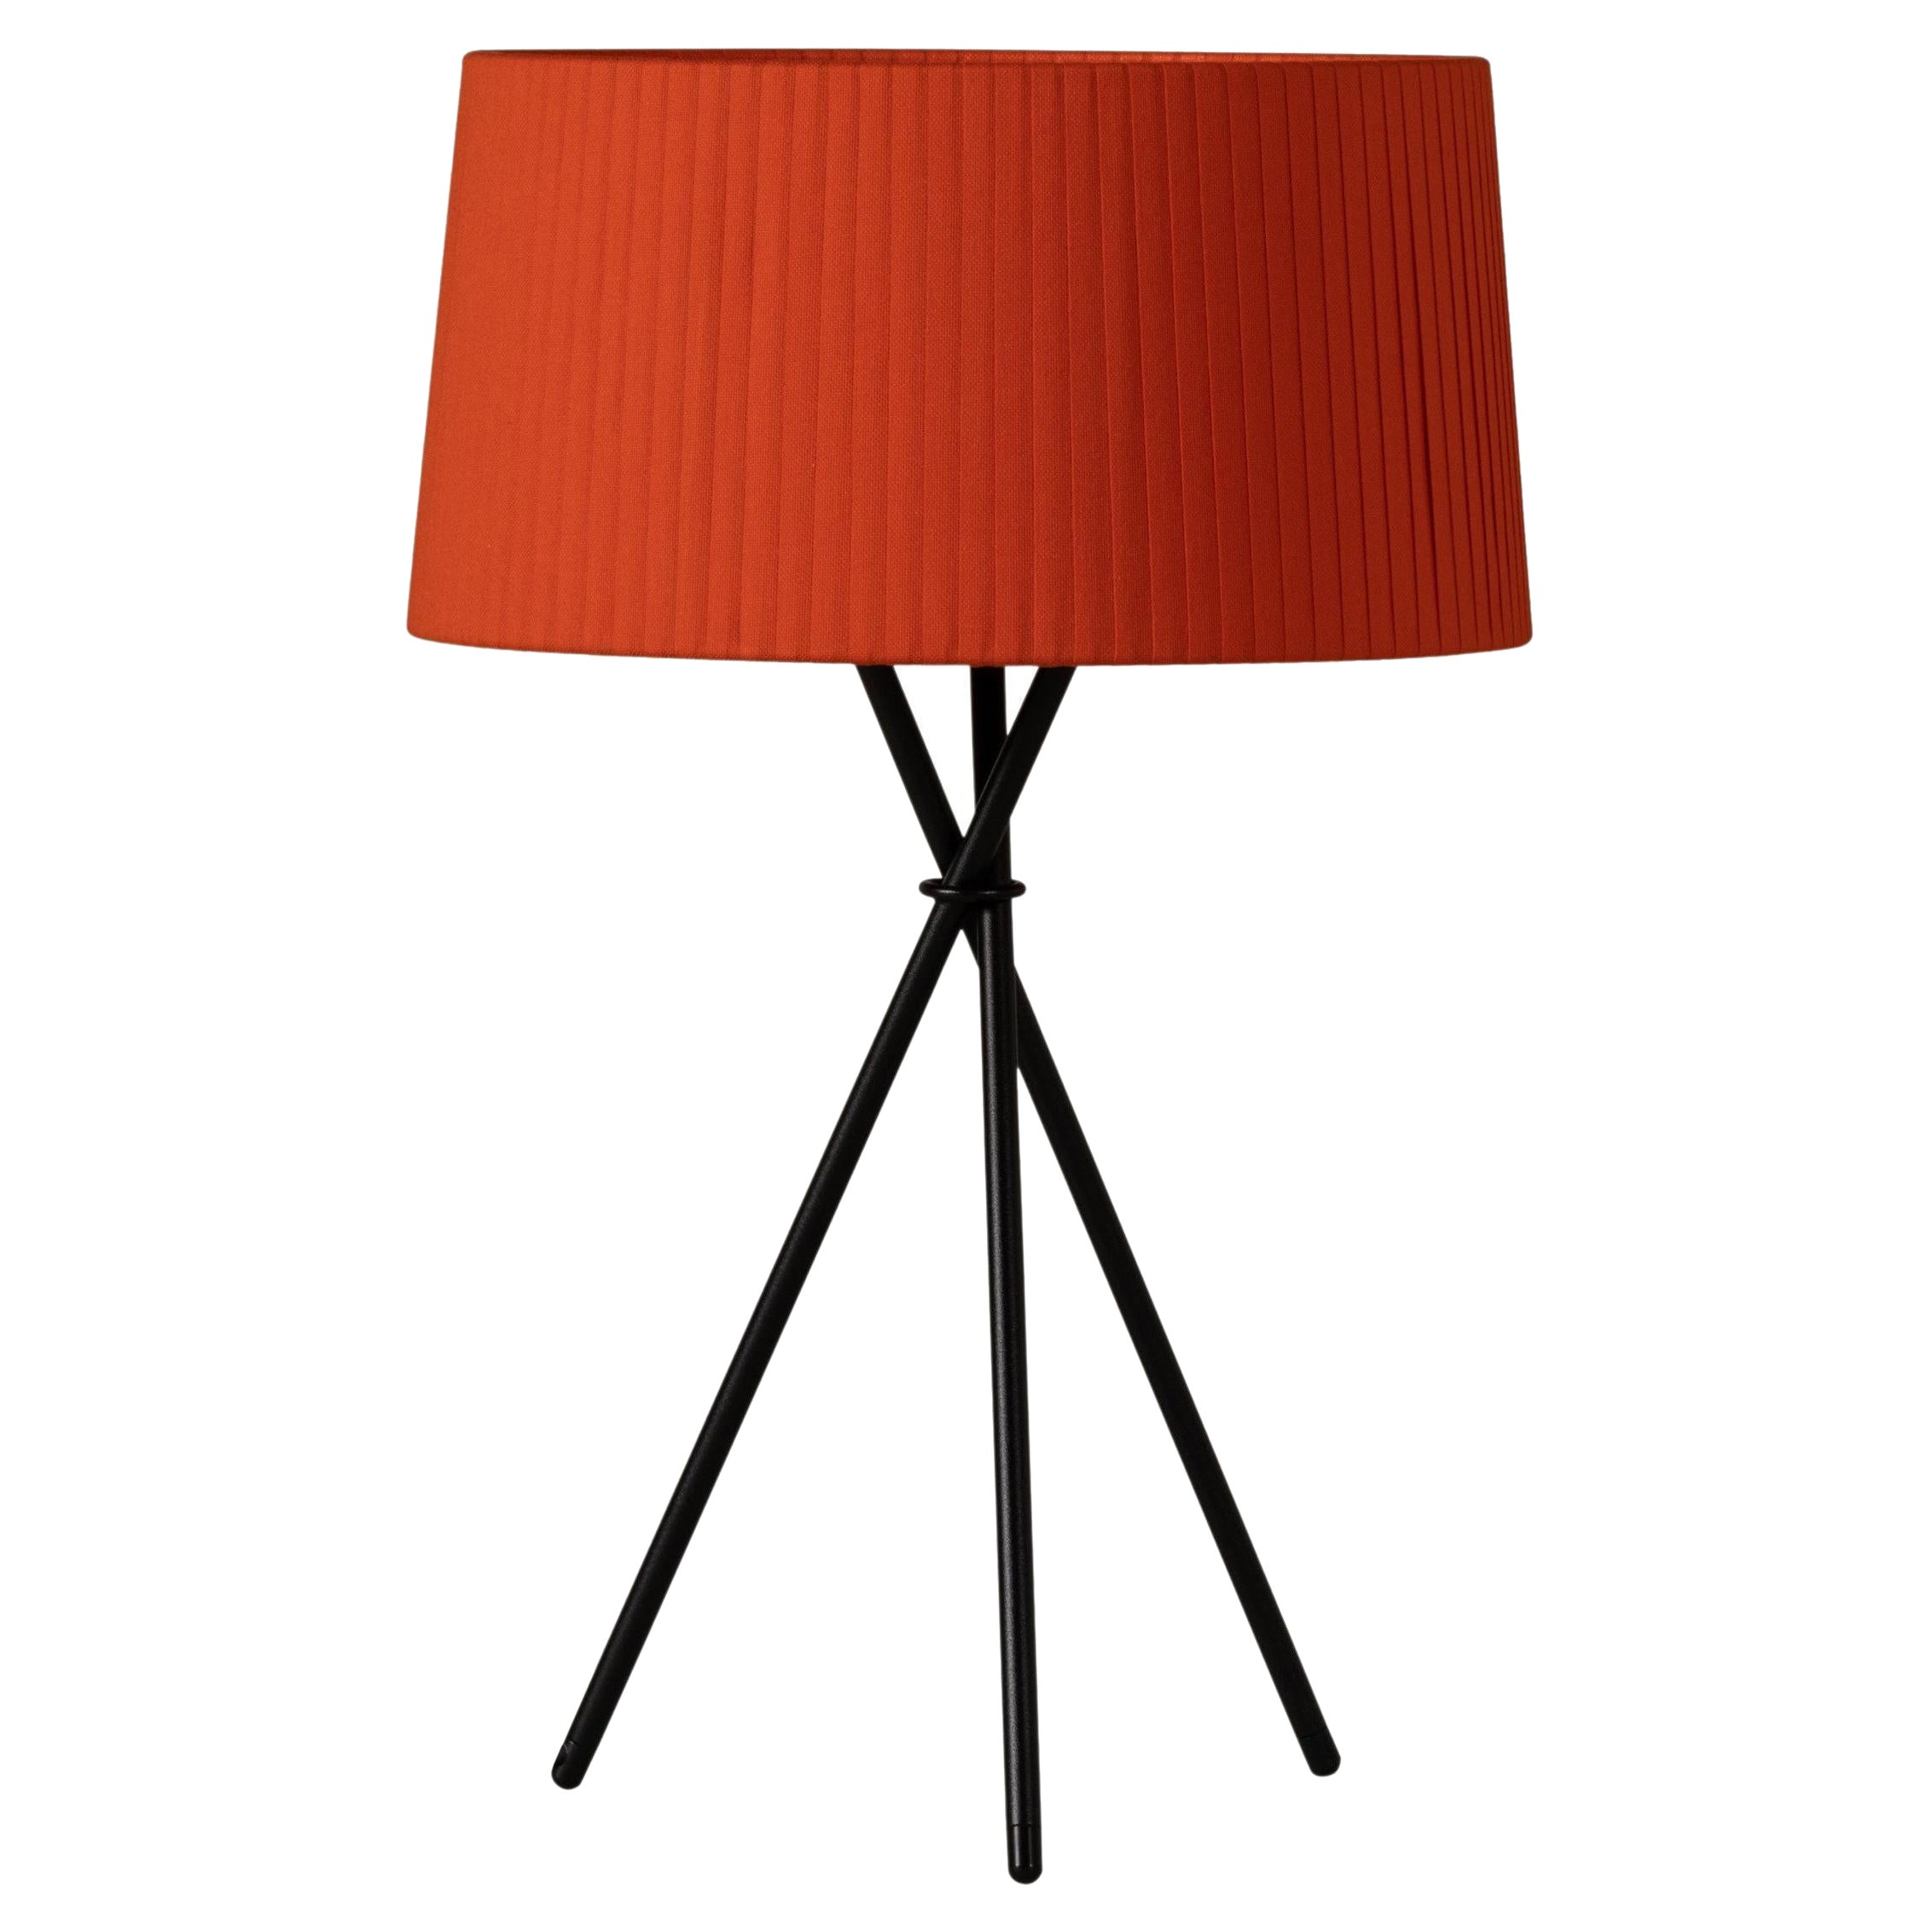 Red Trípode M3 Table Lamp by Santa & Cole